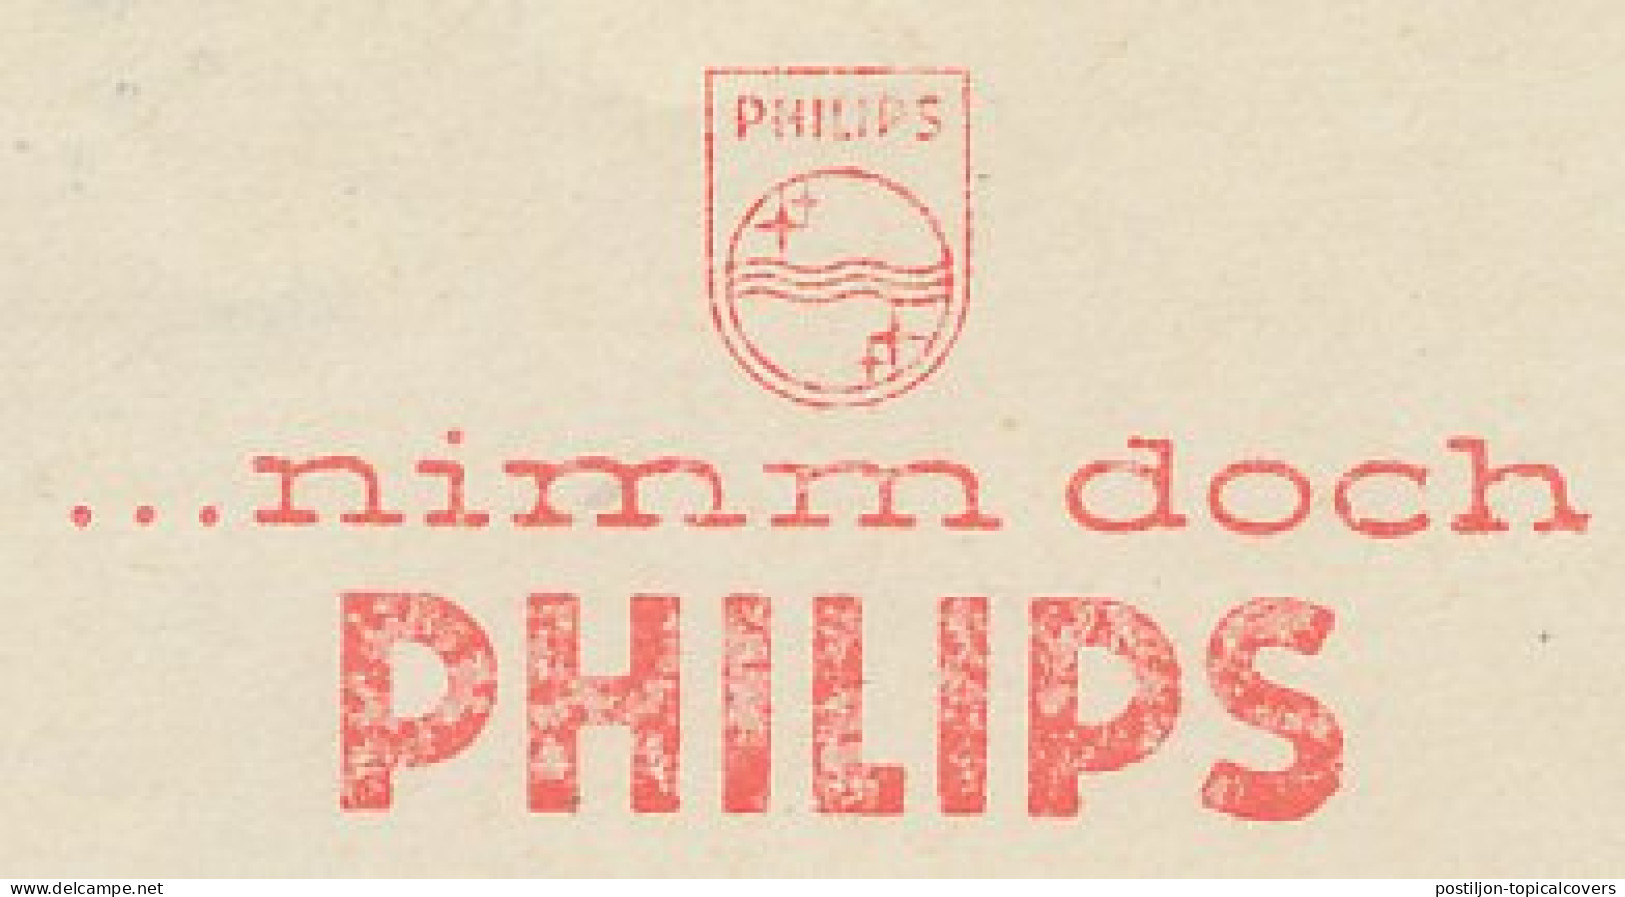 Meter Cut Germany 1958 Philips - Electricity